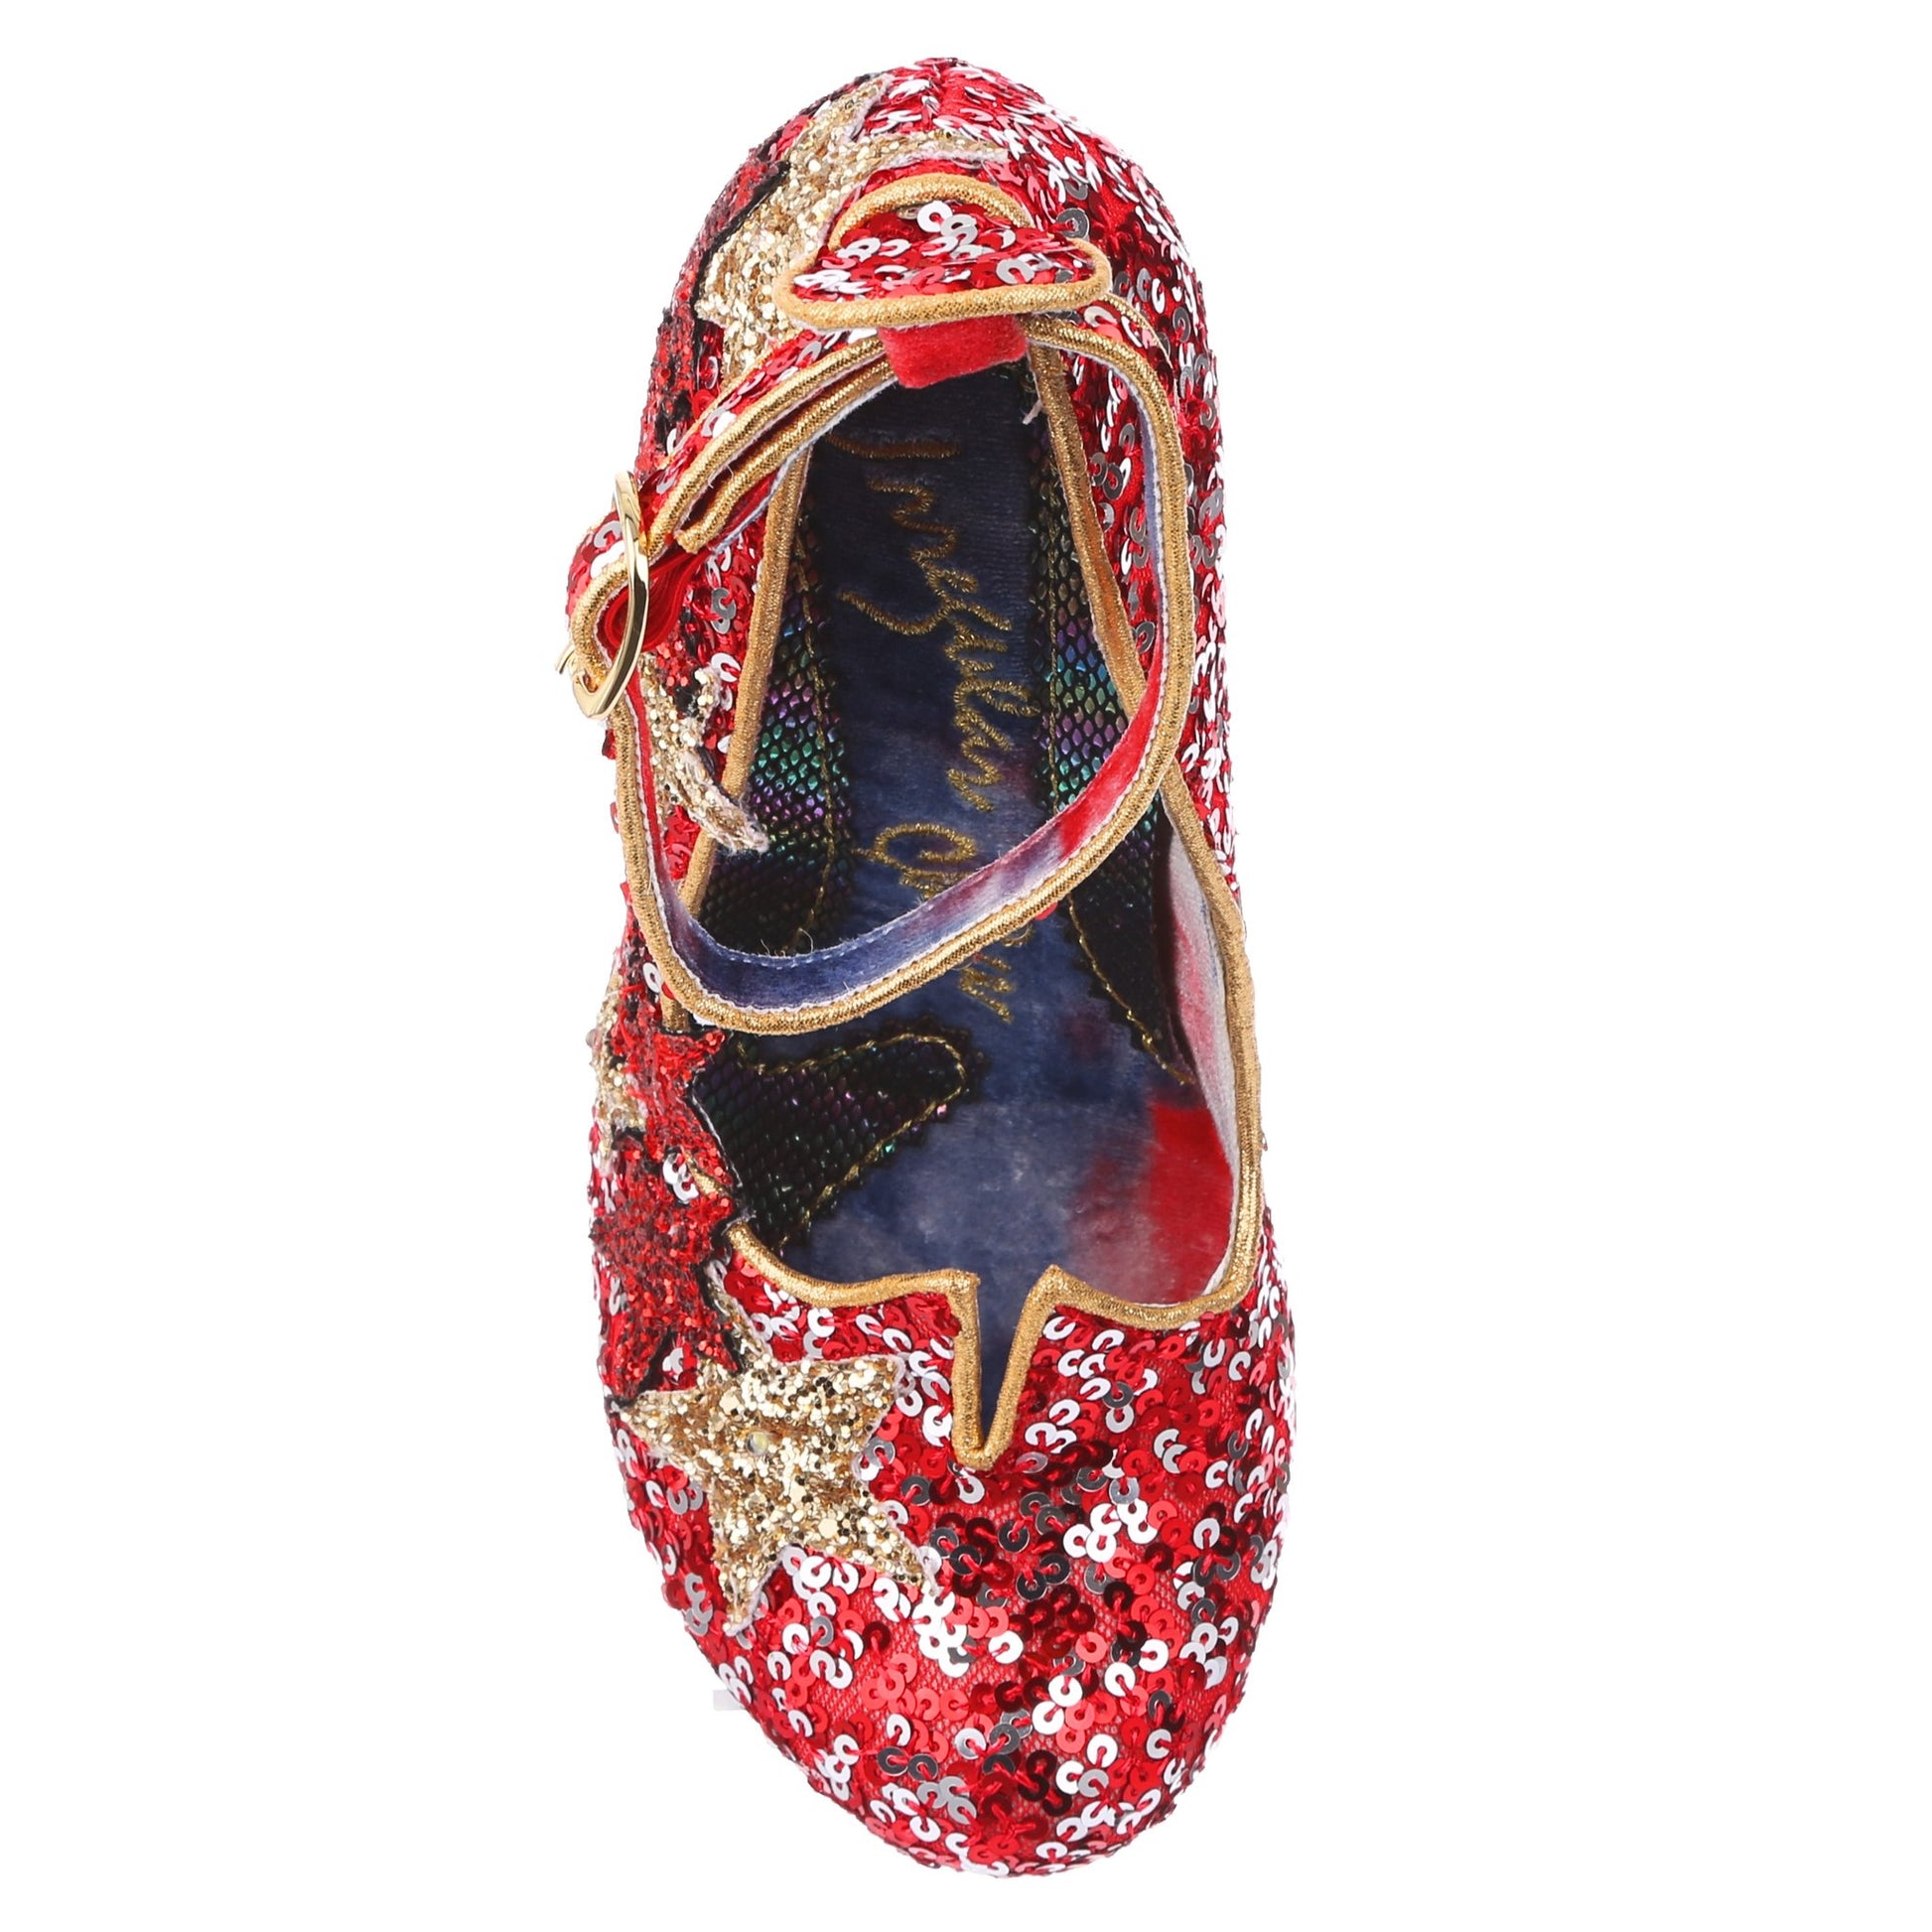 Shooting Star in Red and Gold by Irregular Choice - Isabel’s Retro & Vintage Clothing